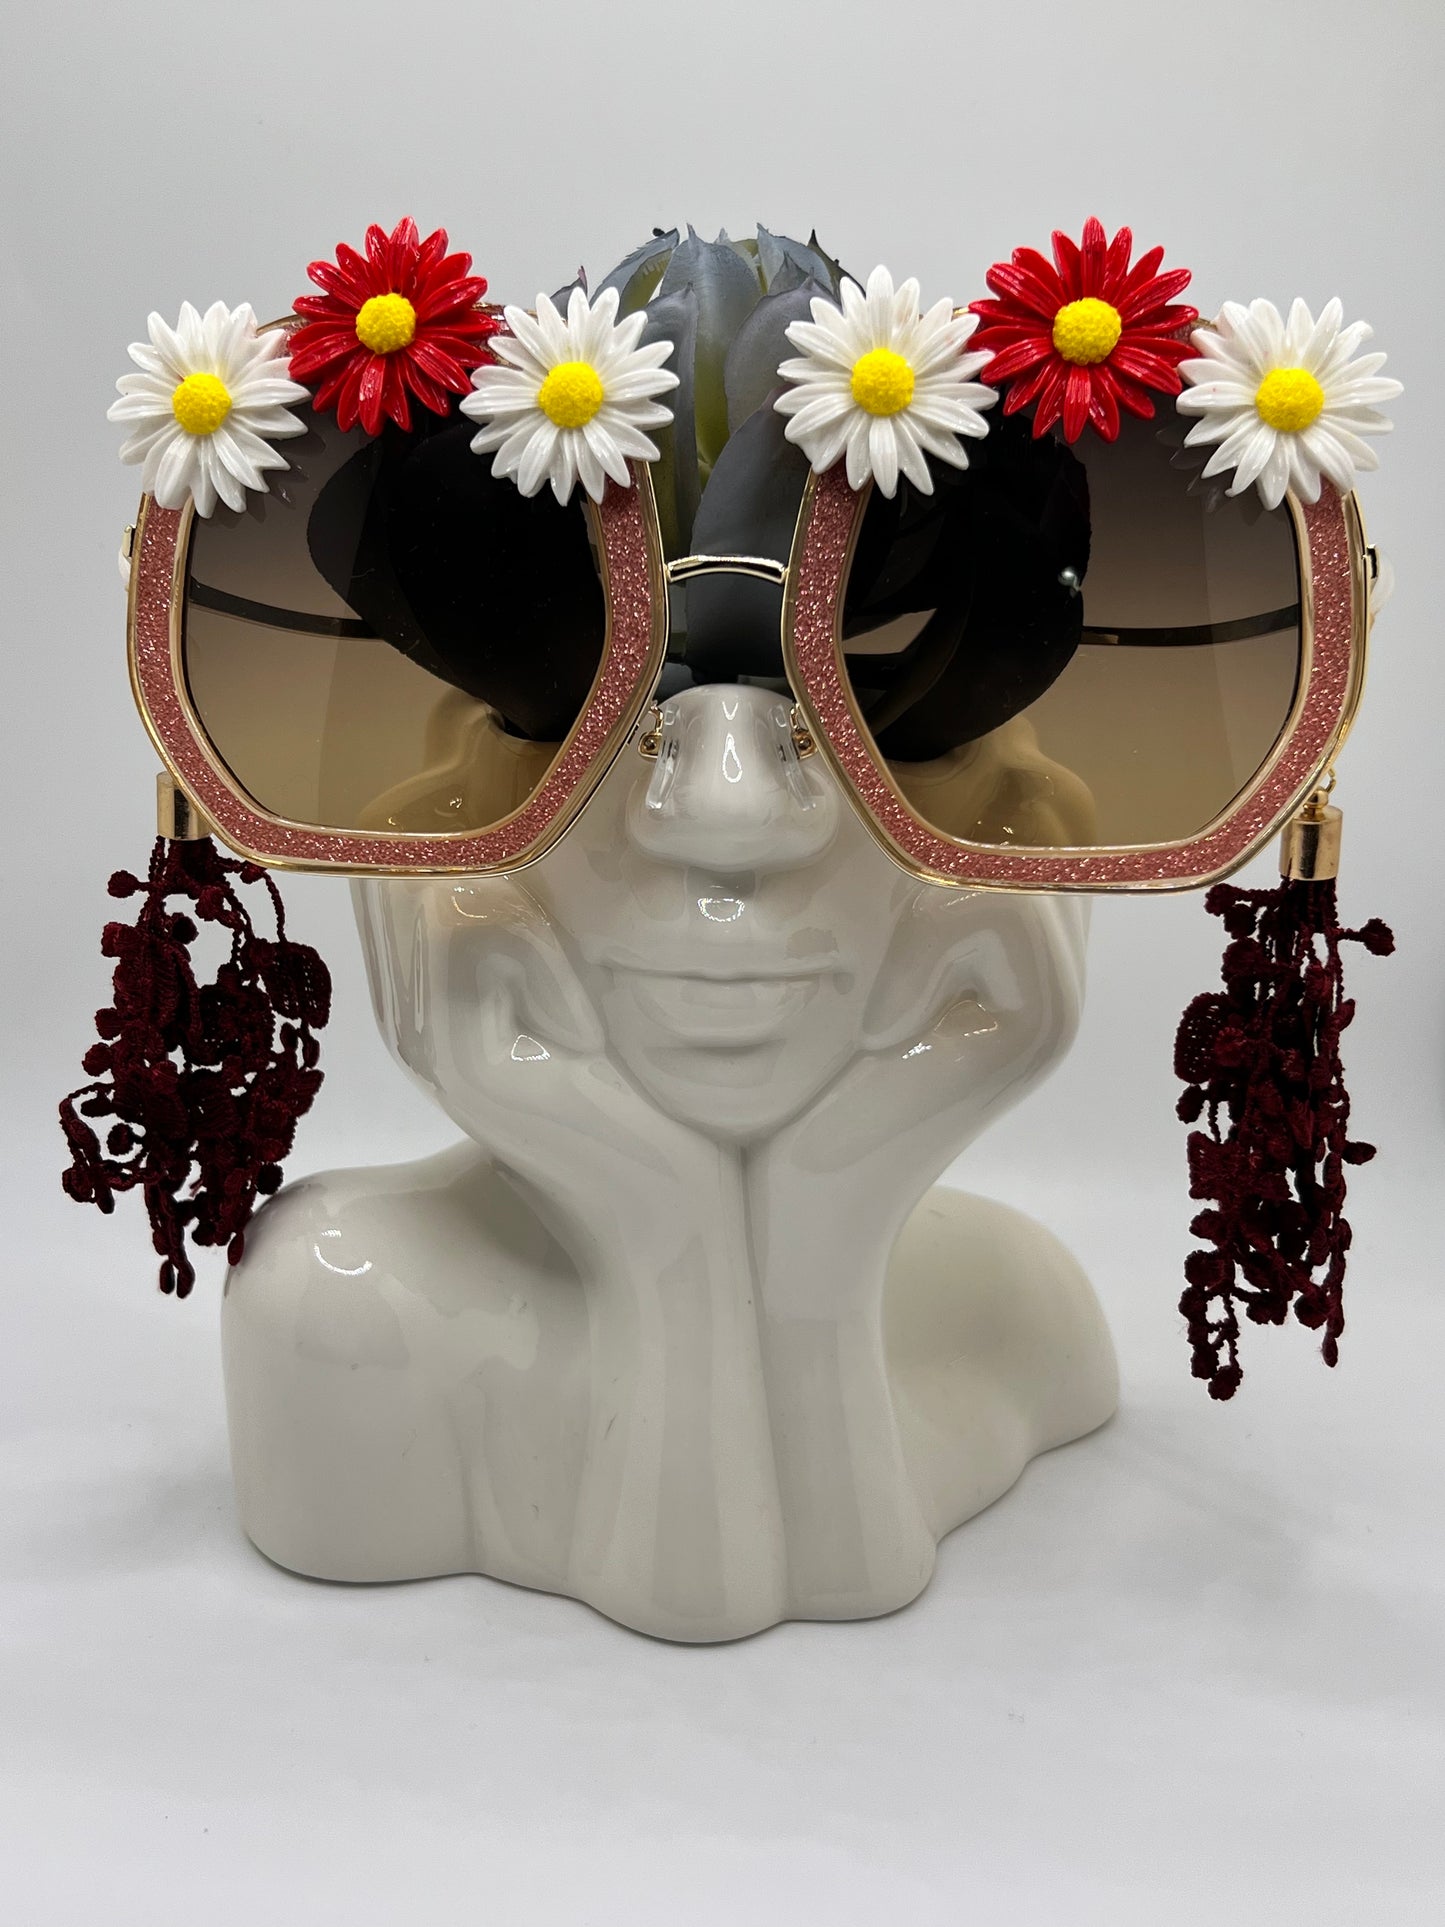 These glimmering red frames are embellished with giant white and red daisies and lace tassels in deep red. They also come with a removable gold eyewear chain.